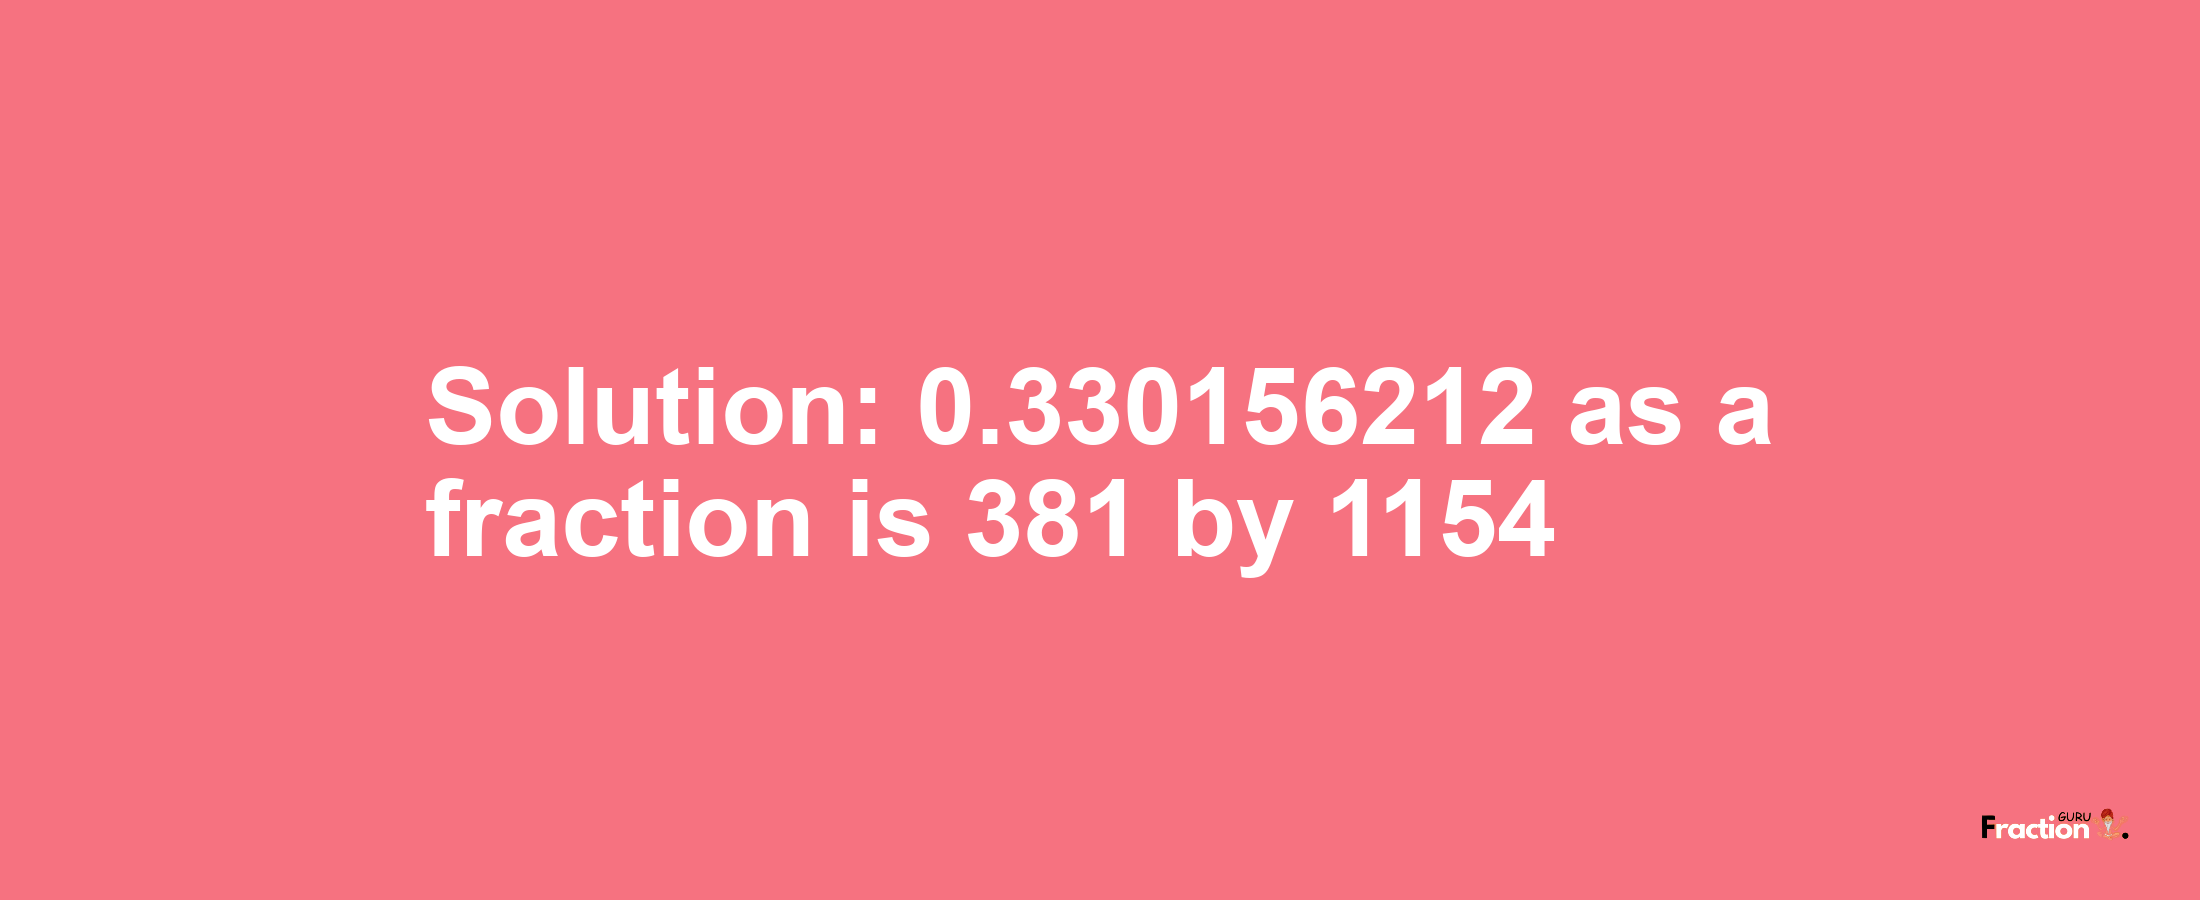 Solution:0.330156212 as a fraction is 381/1154